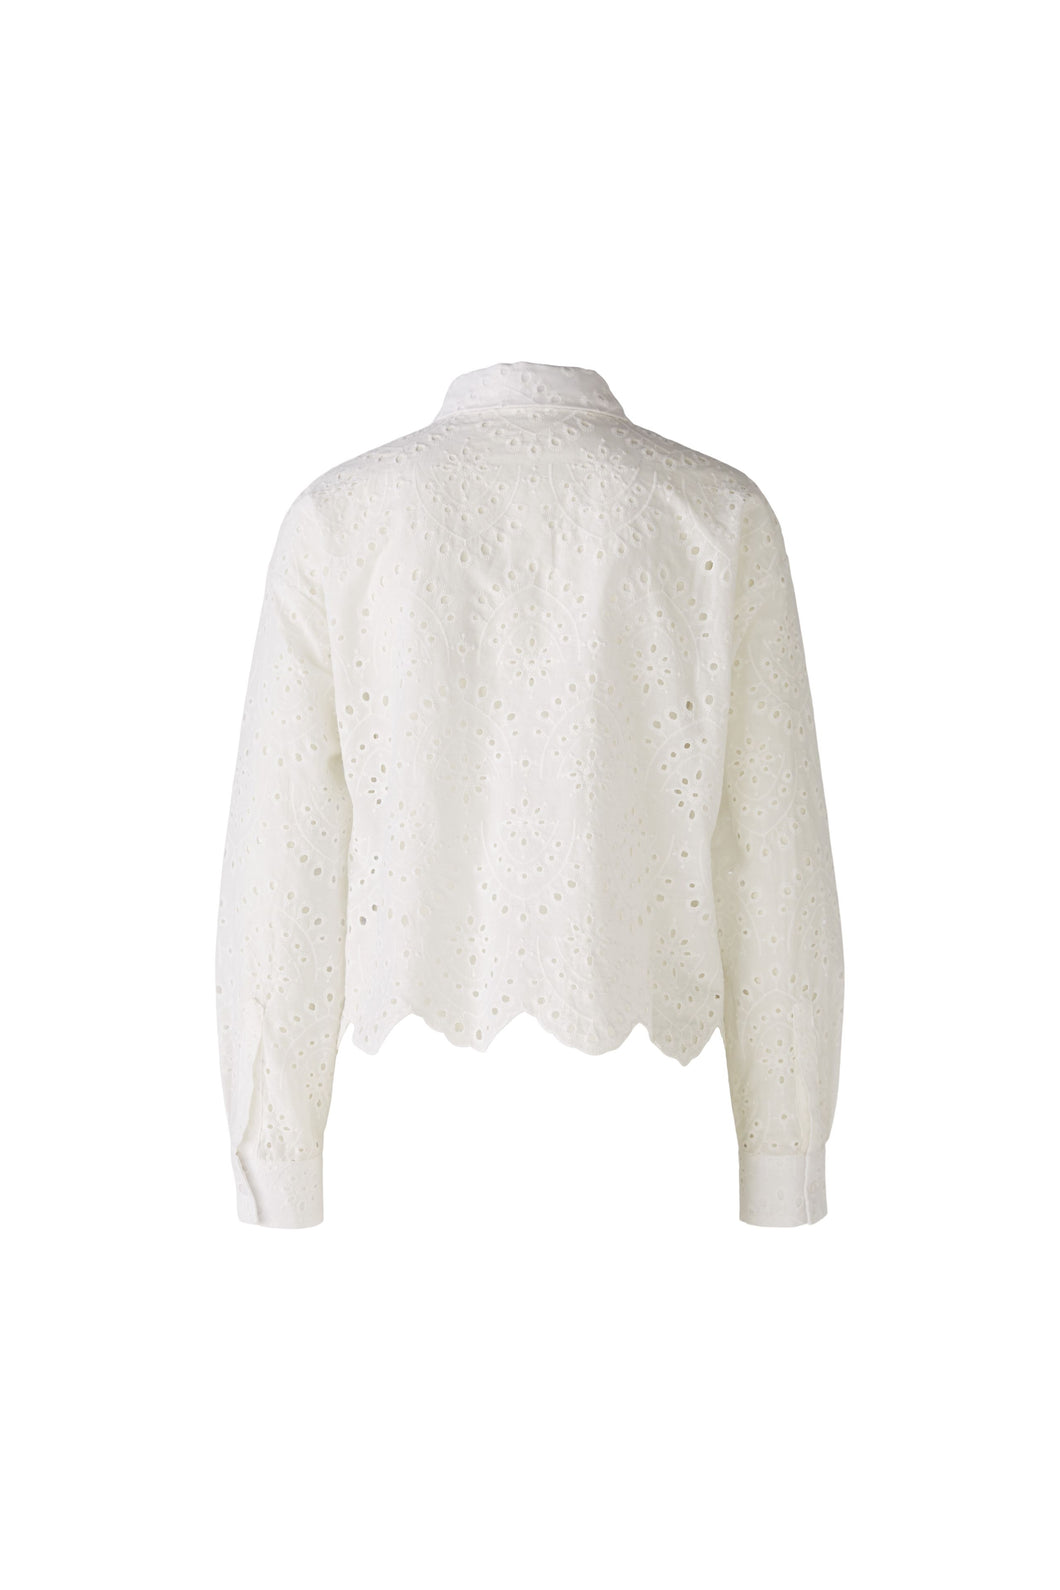 Oui - Blouse in White